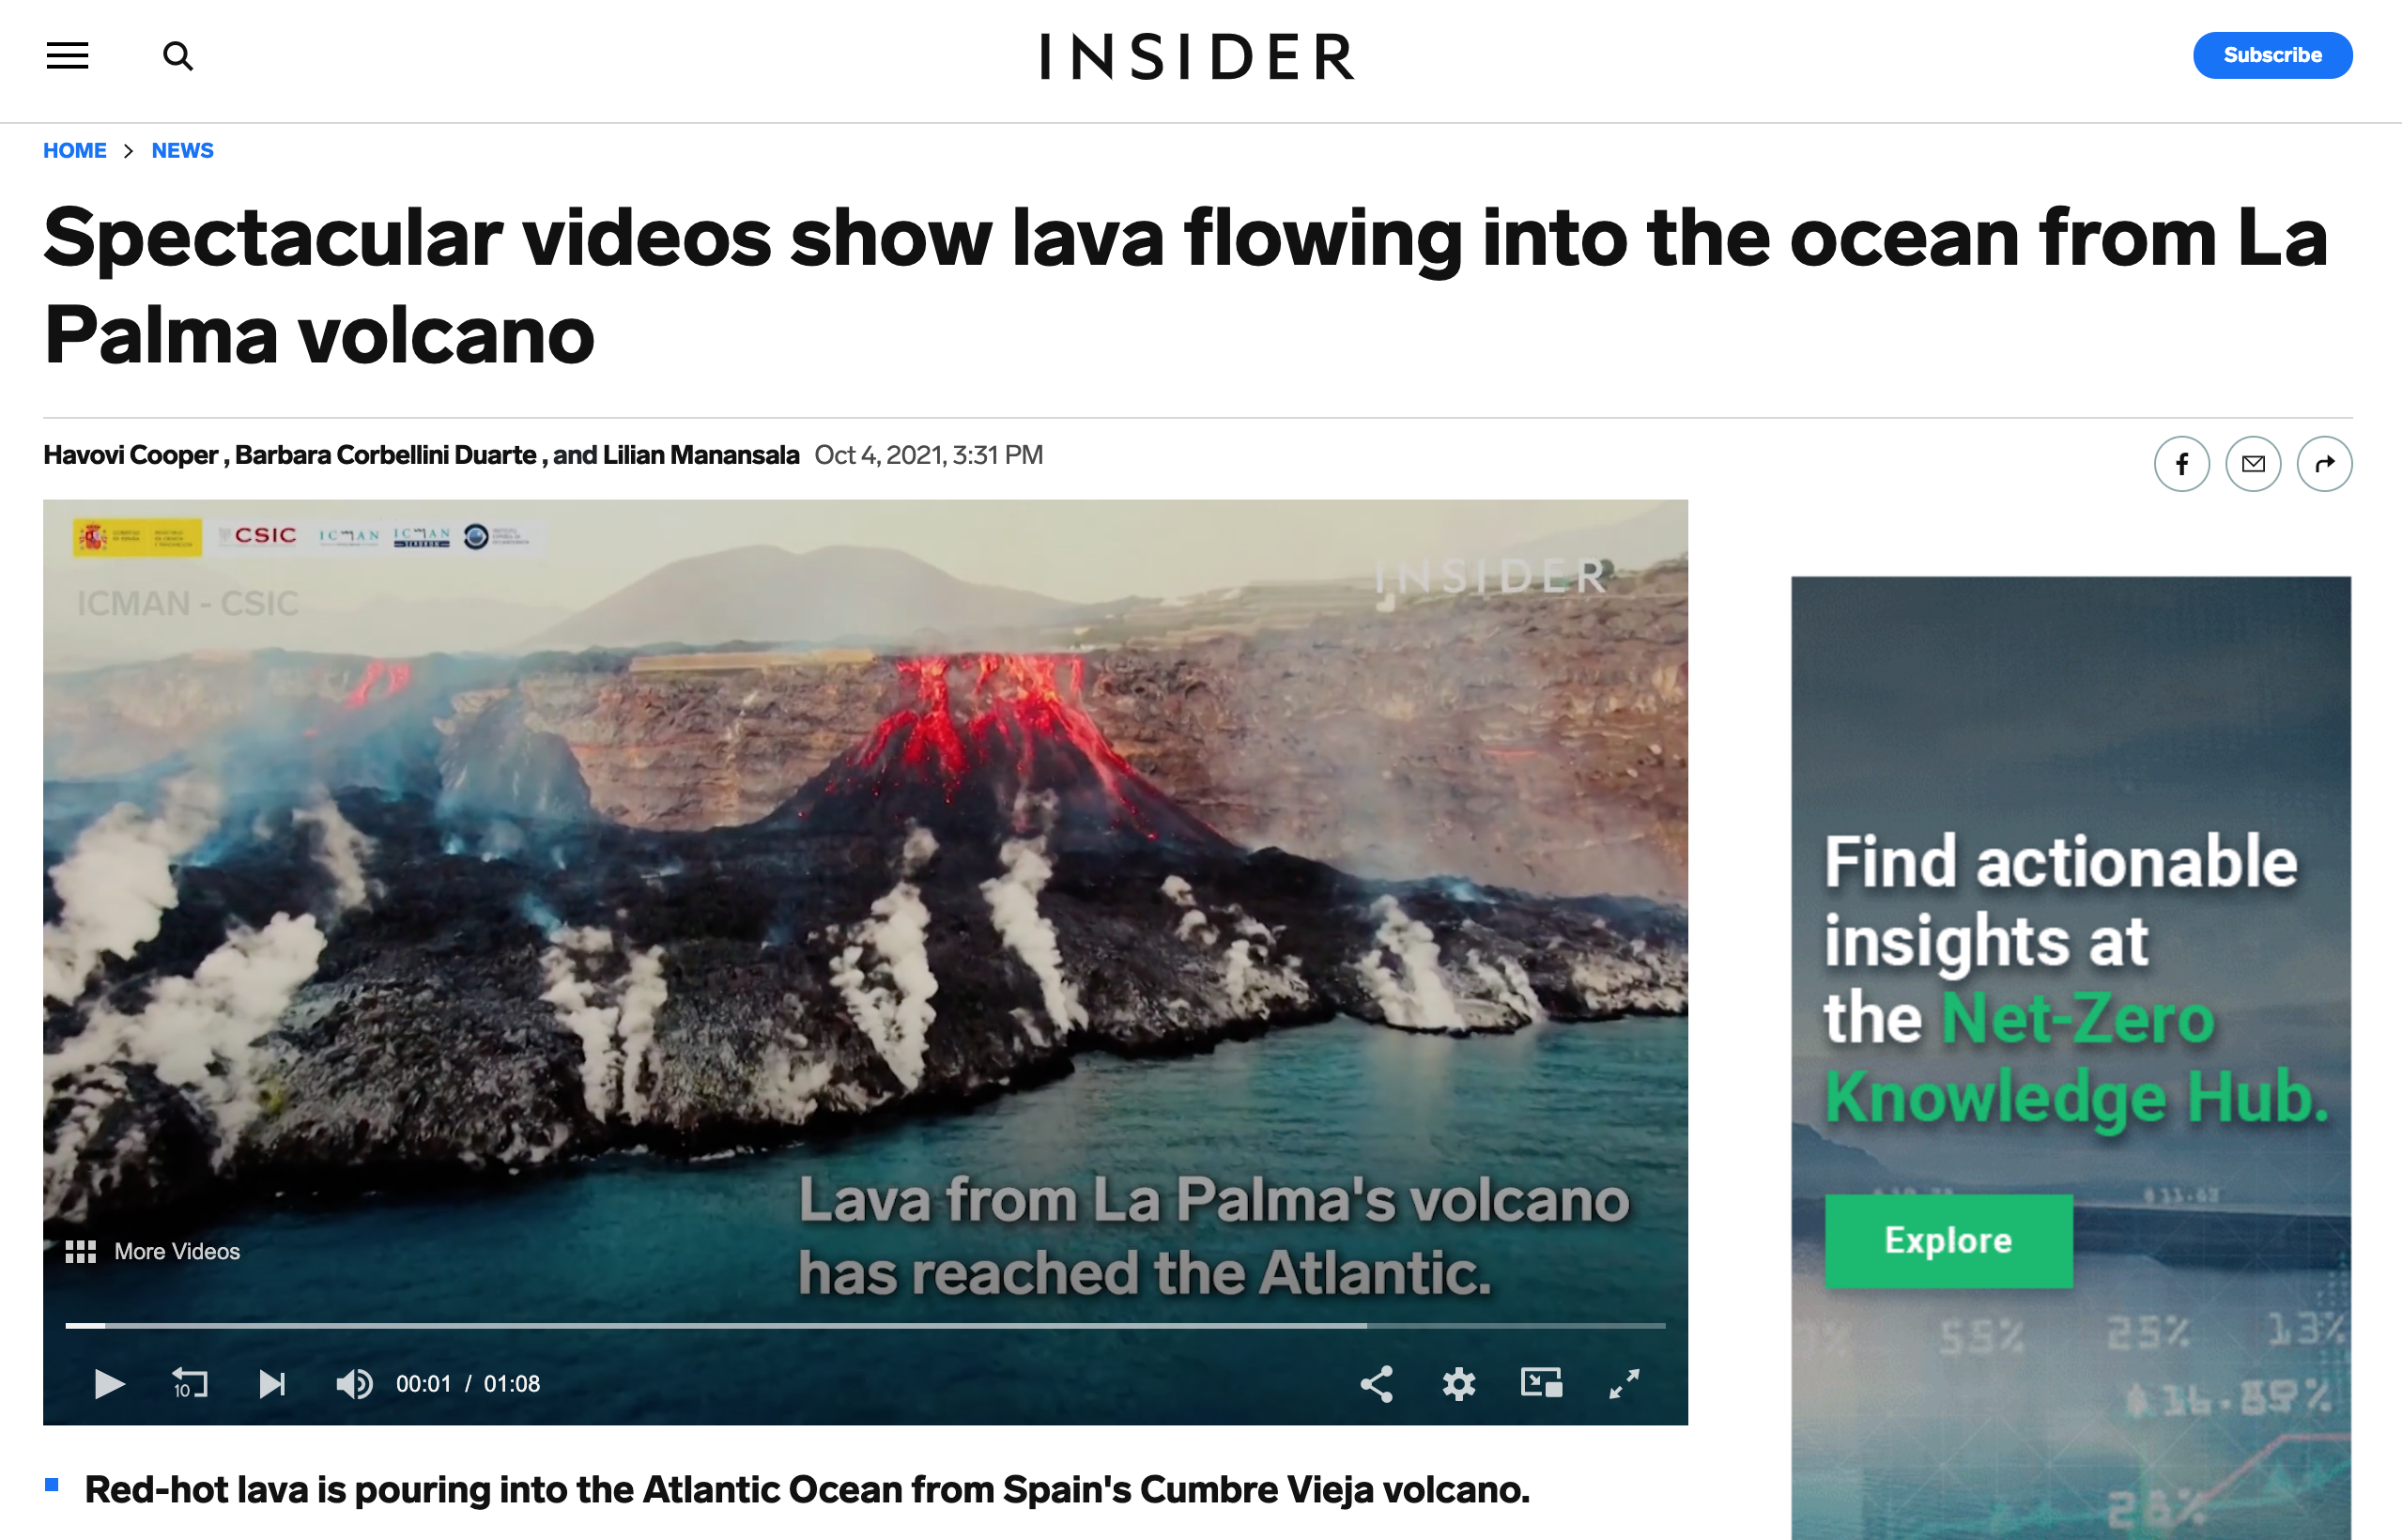 Spectacular videos show lava flowing into the ocean from La Palma volcano